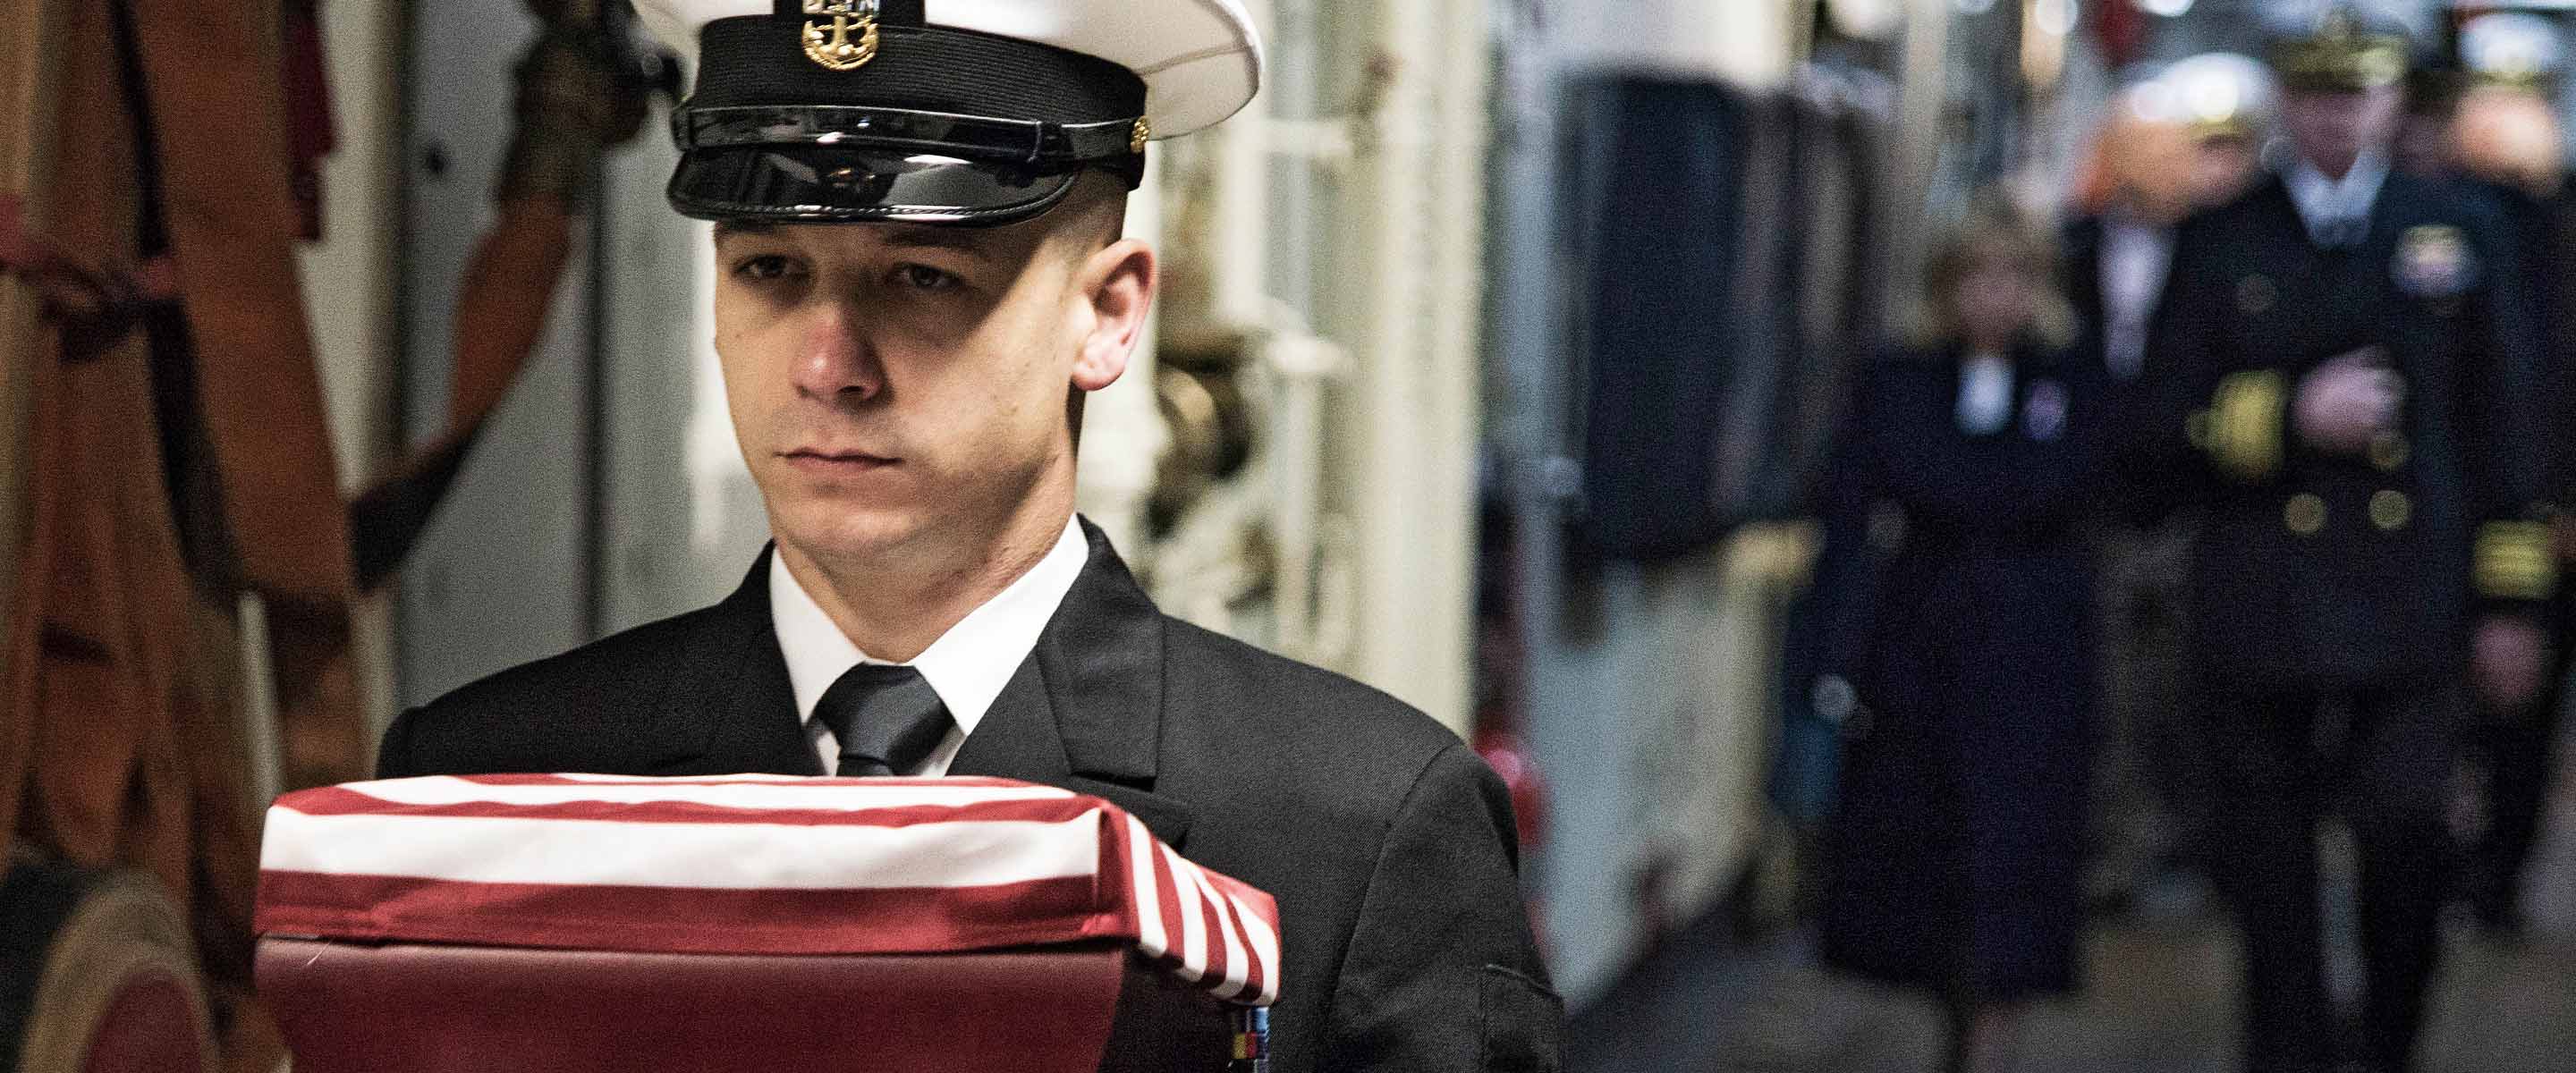 Navy religious programming specialist carries a folded American Flag